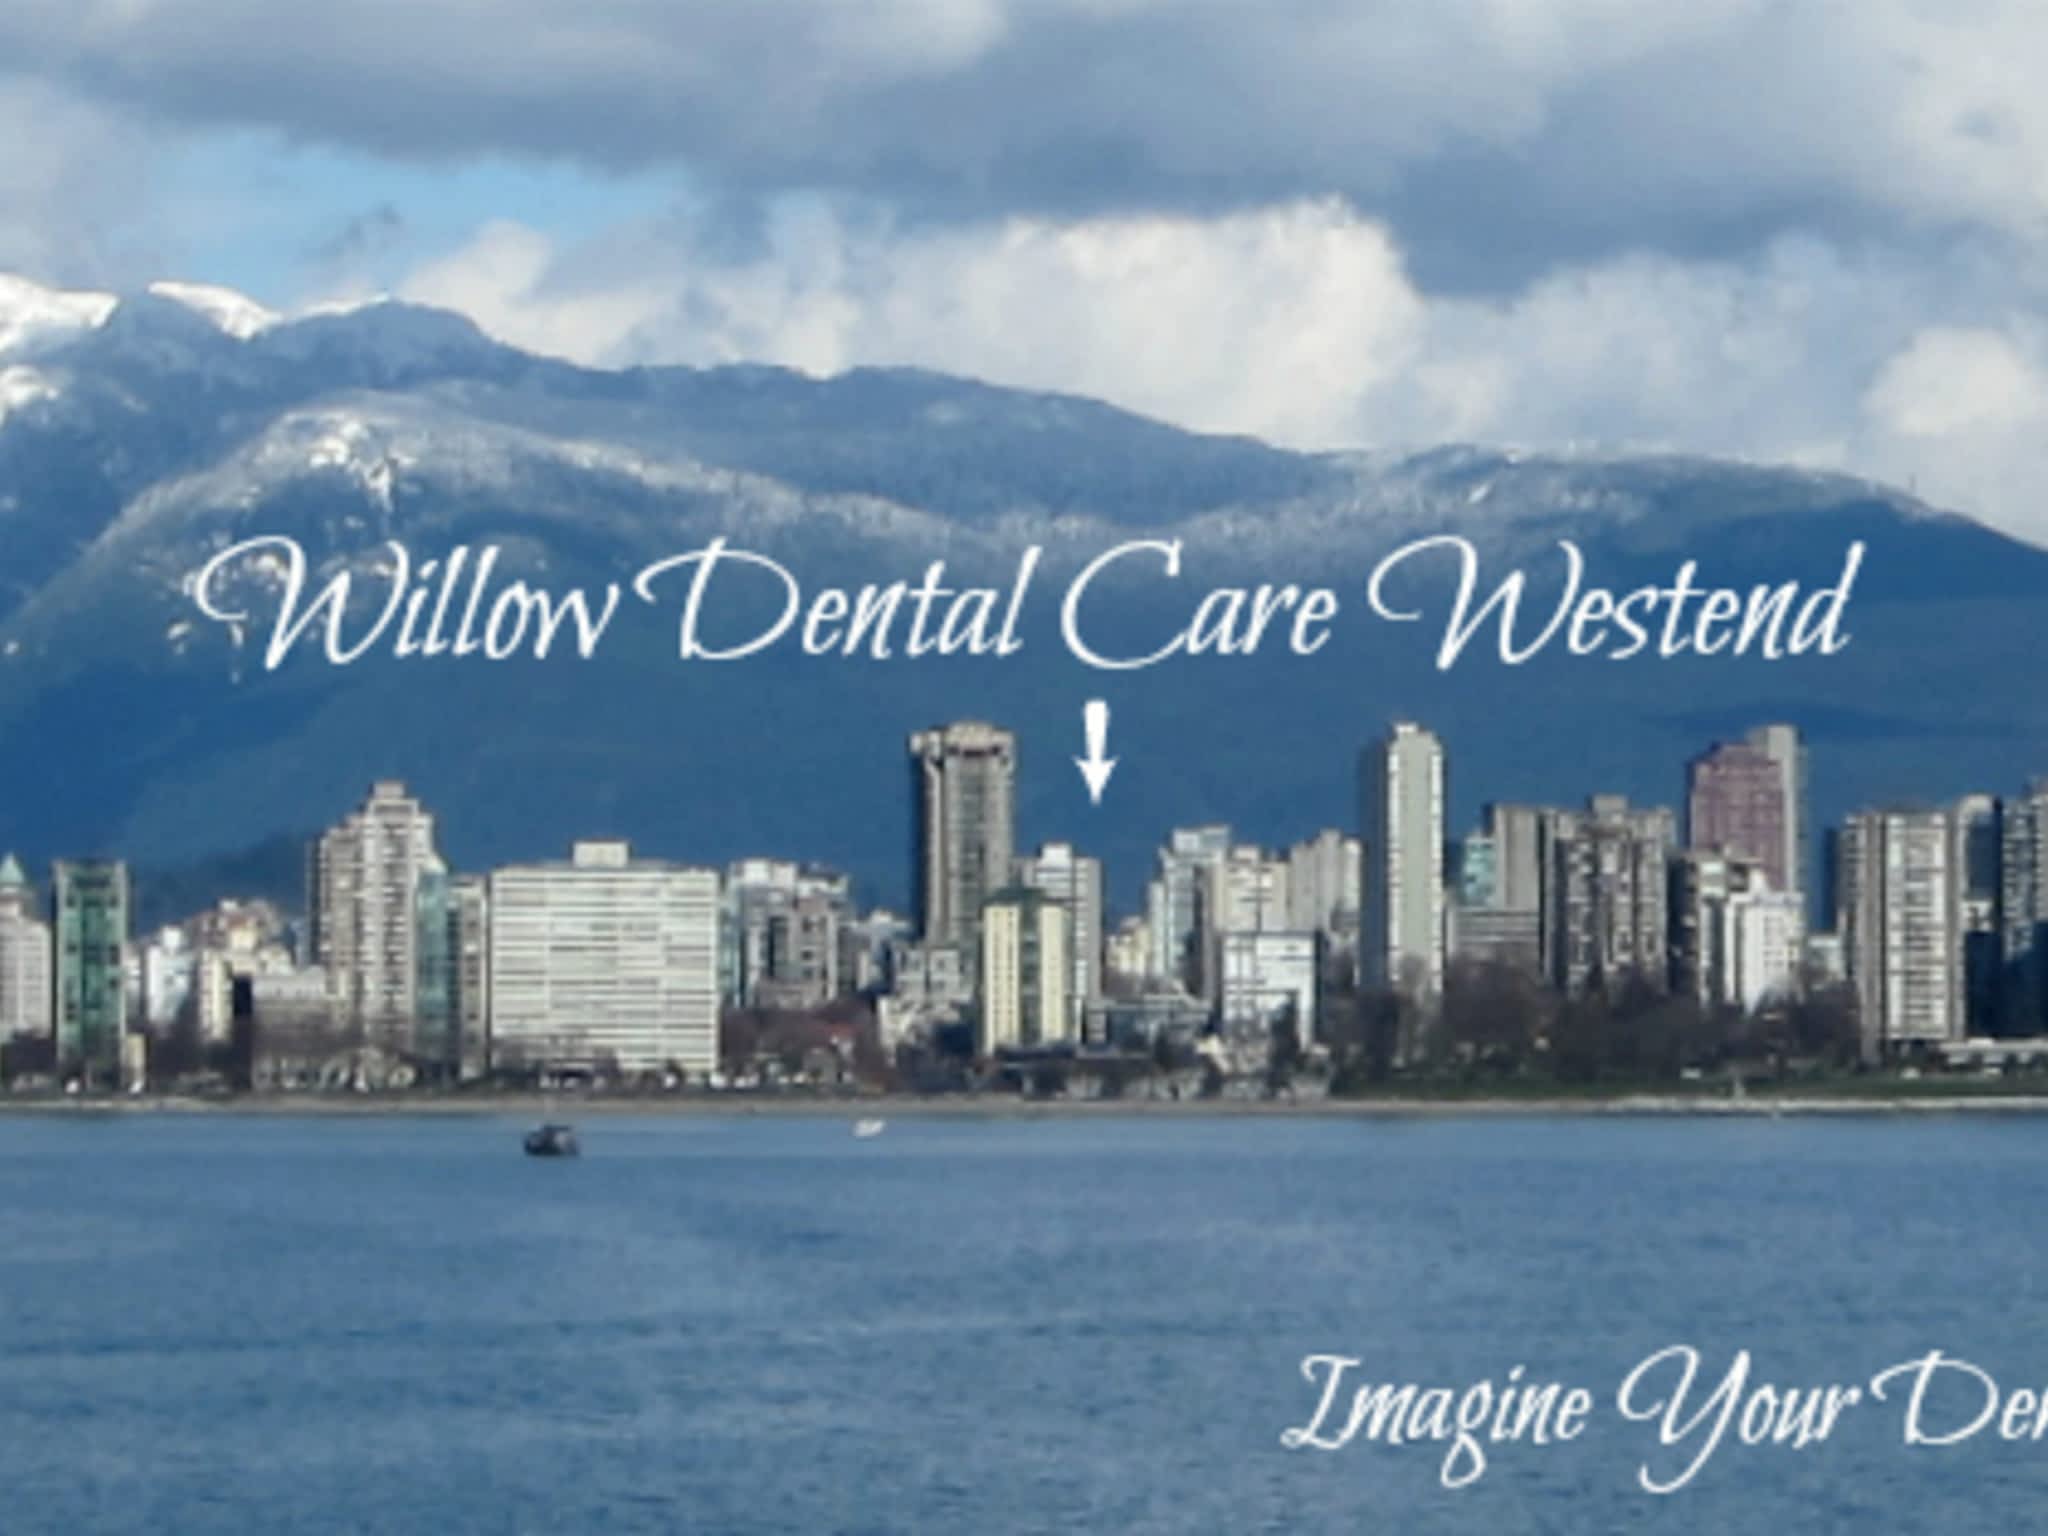 photo Willow Dental Care West End